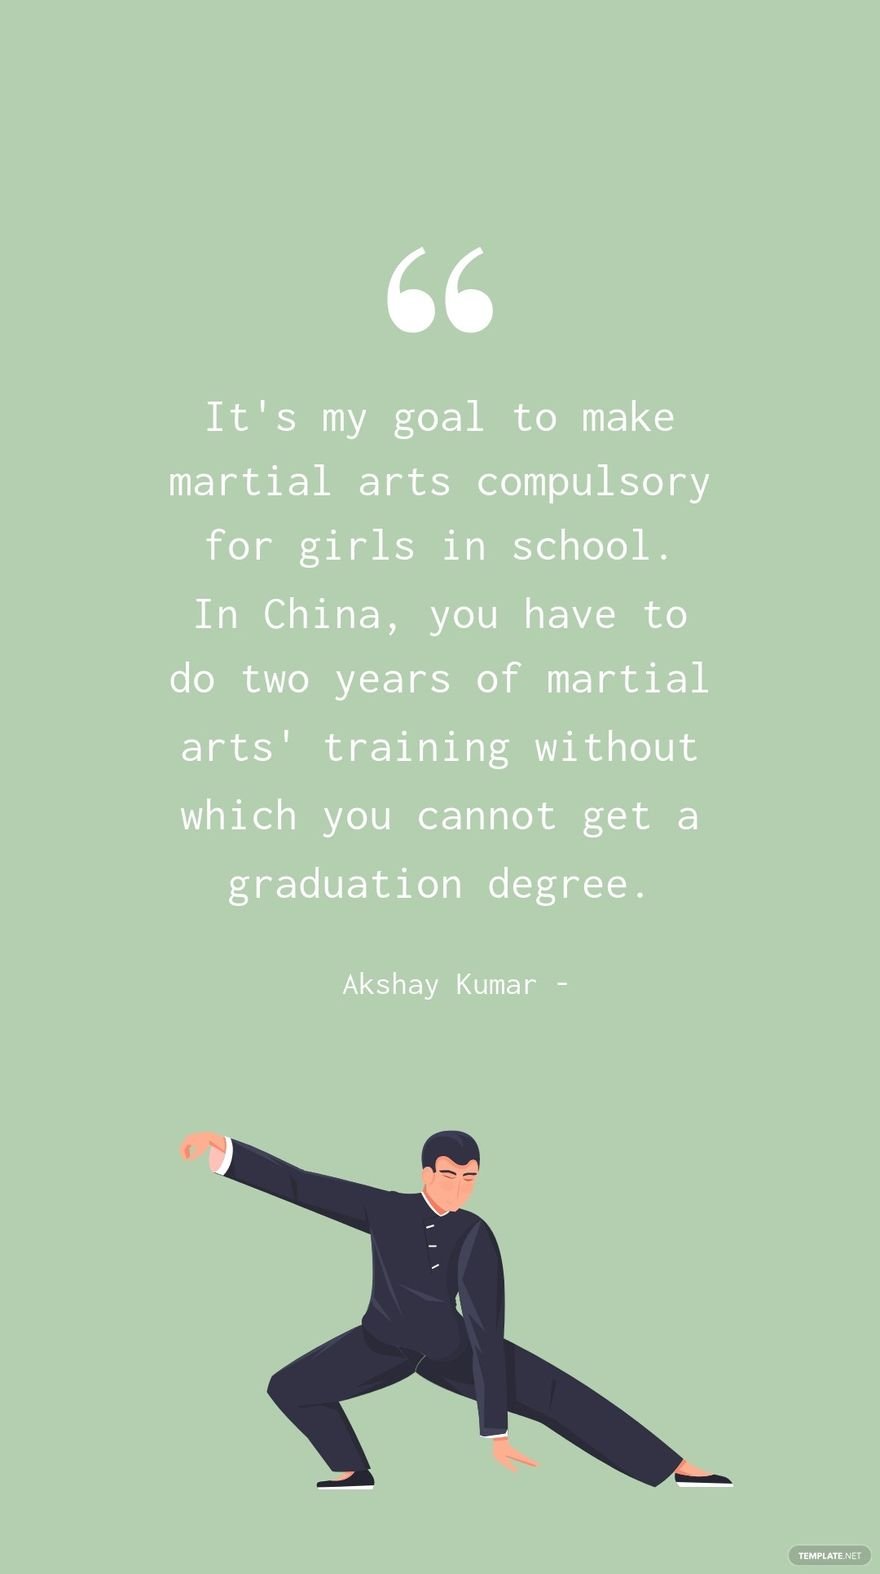 Free Akshay Kumar - It's my goal to make martial arts compulsory for girls in school. In China, you have to do two years of martial arts' training without which you cannot get a graduation degree. in JPG